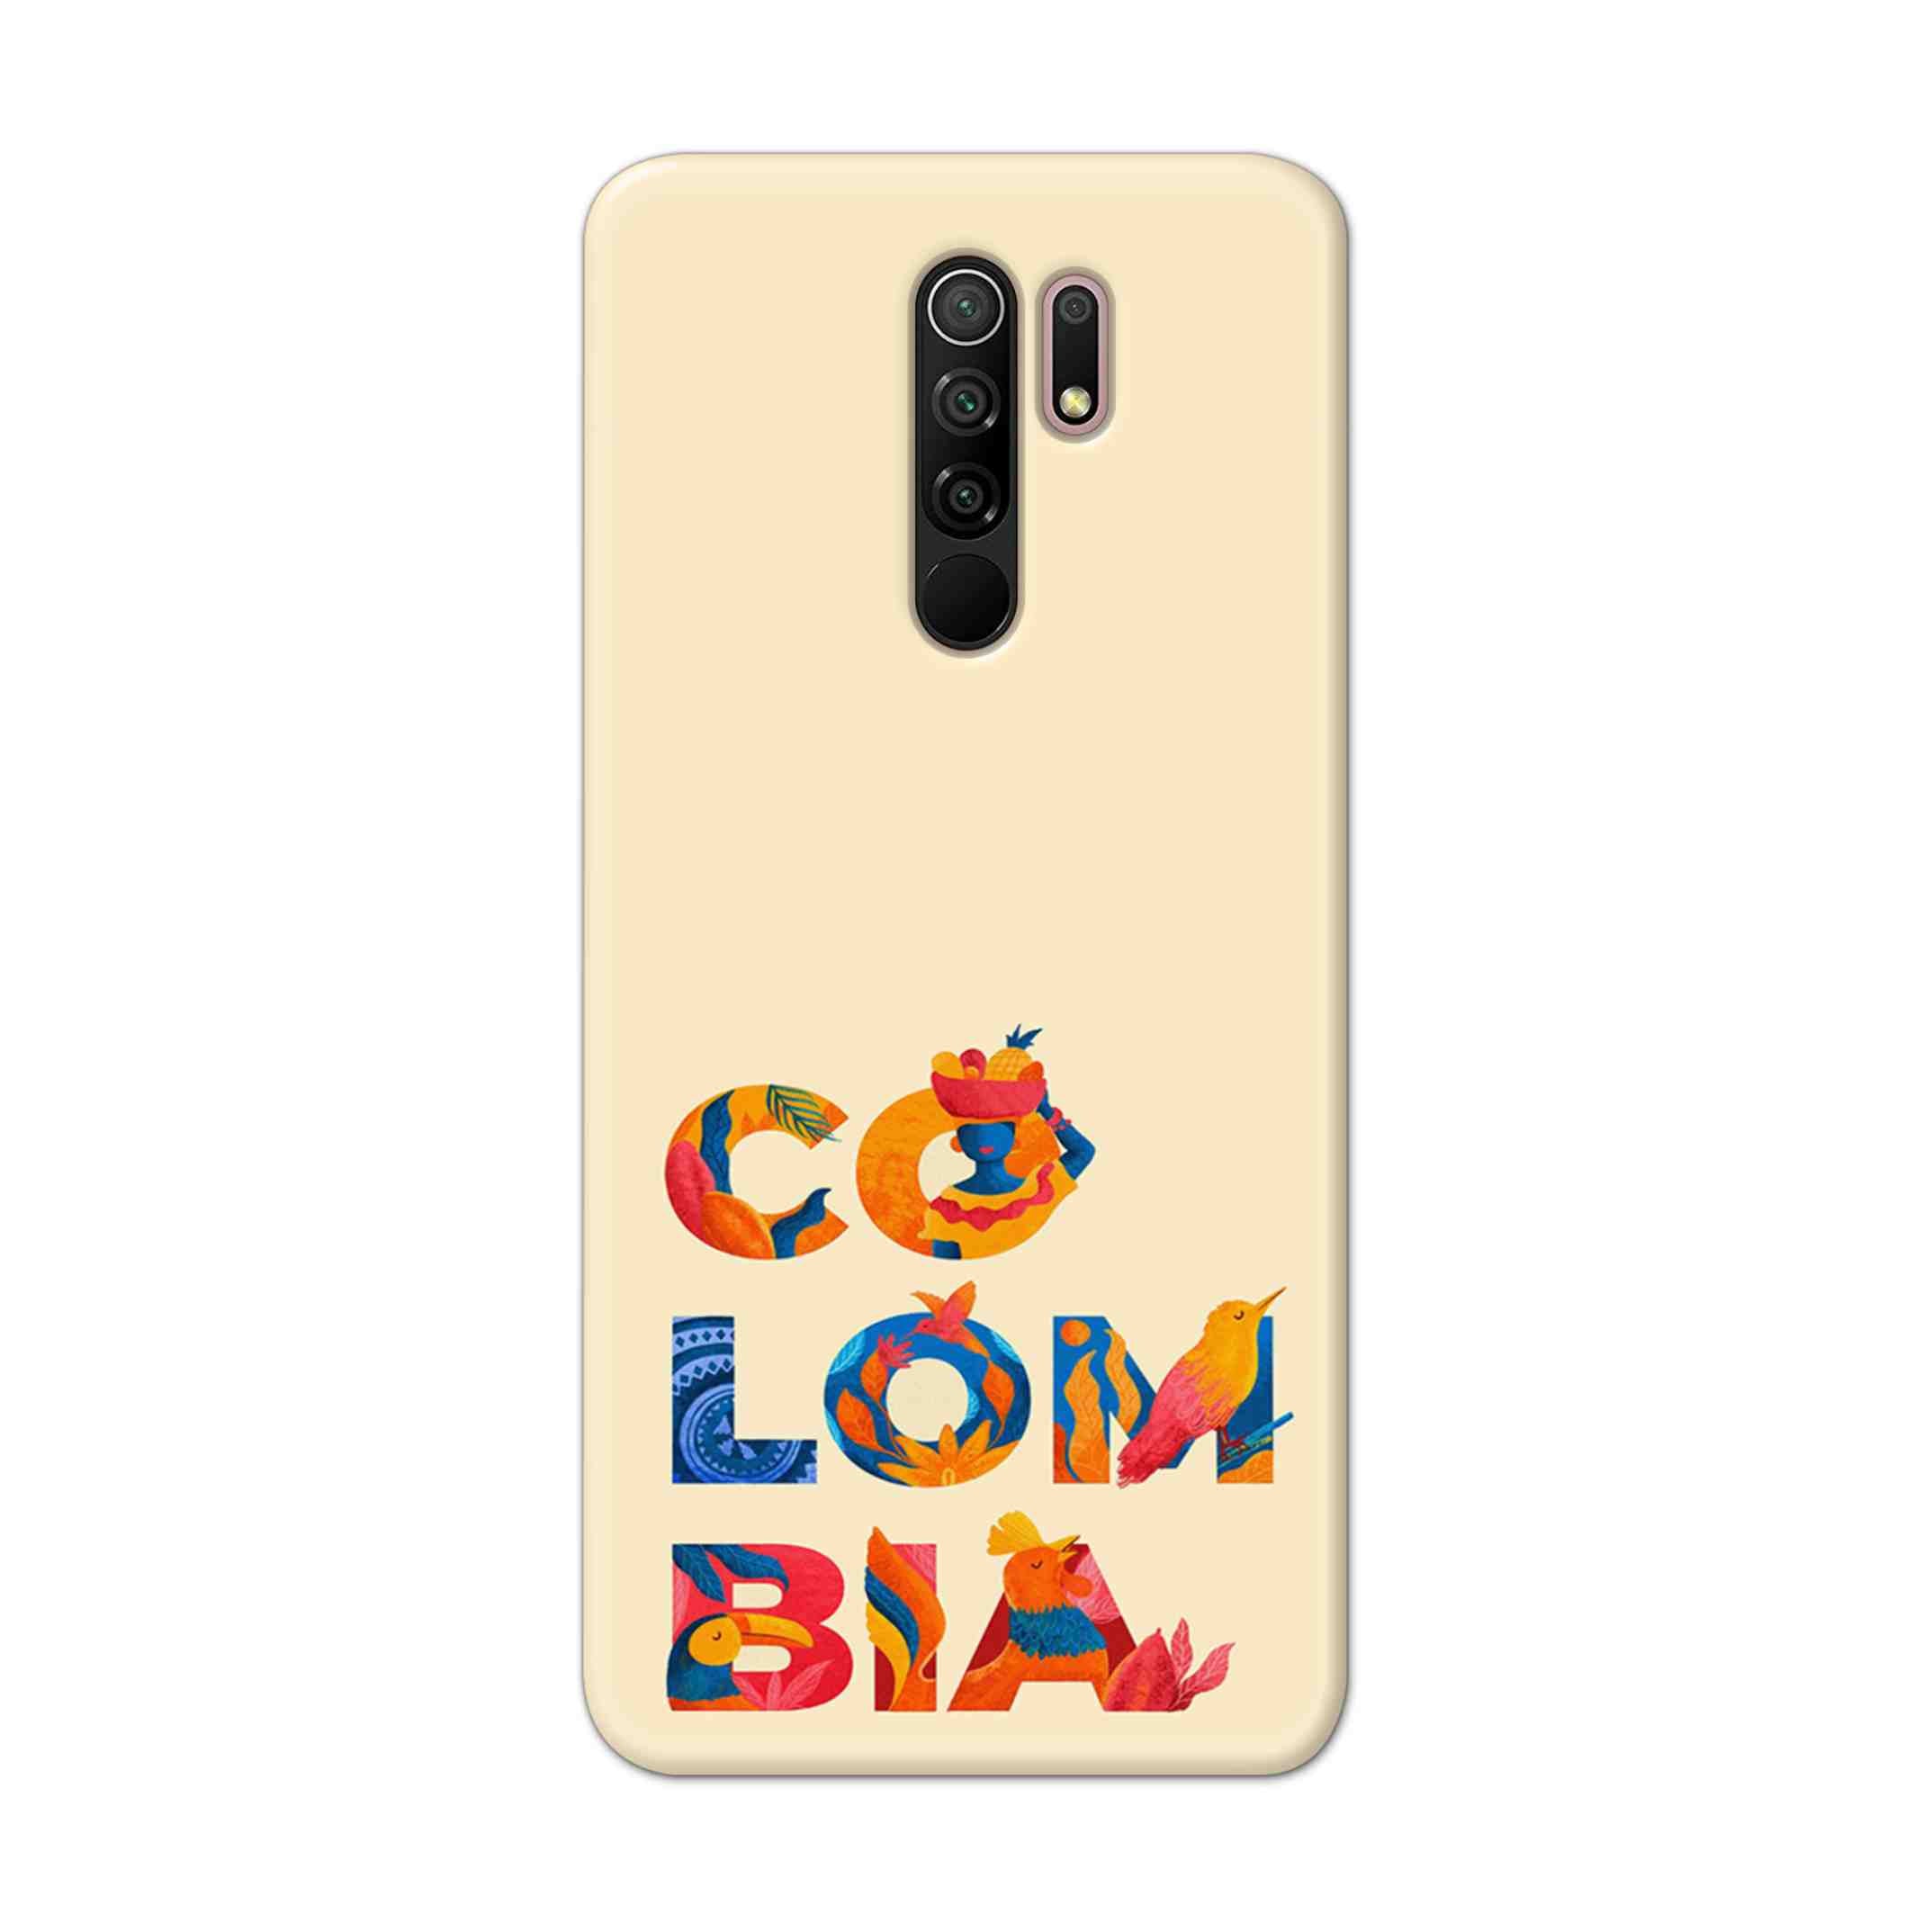 Buy Colombia Hard Back Mobile Phone Case Cover For Xiaomi Redmi 9 Prime Online